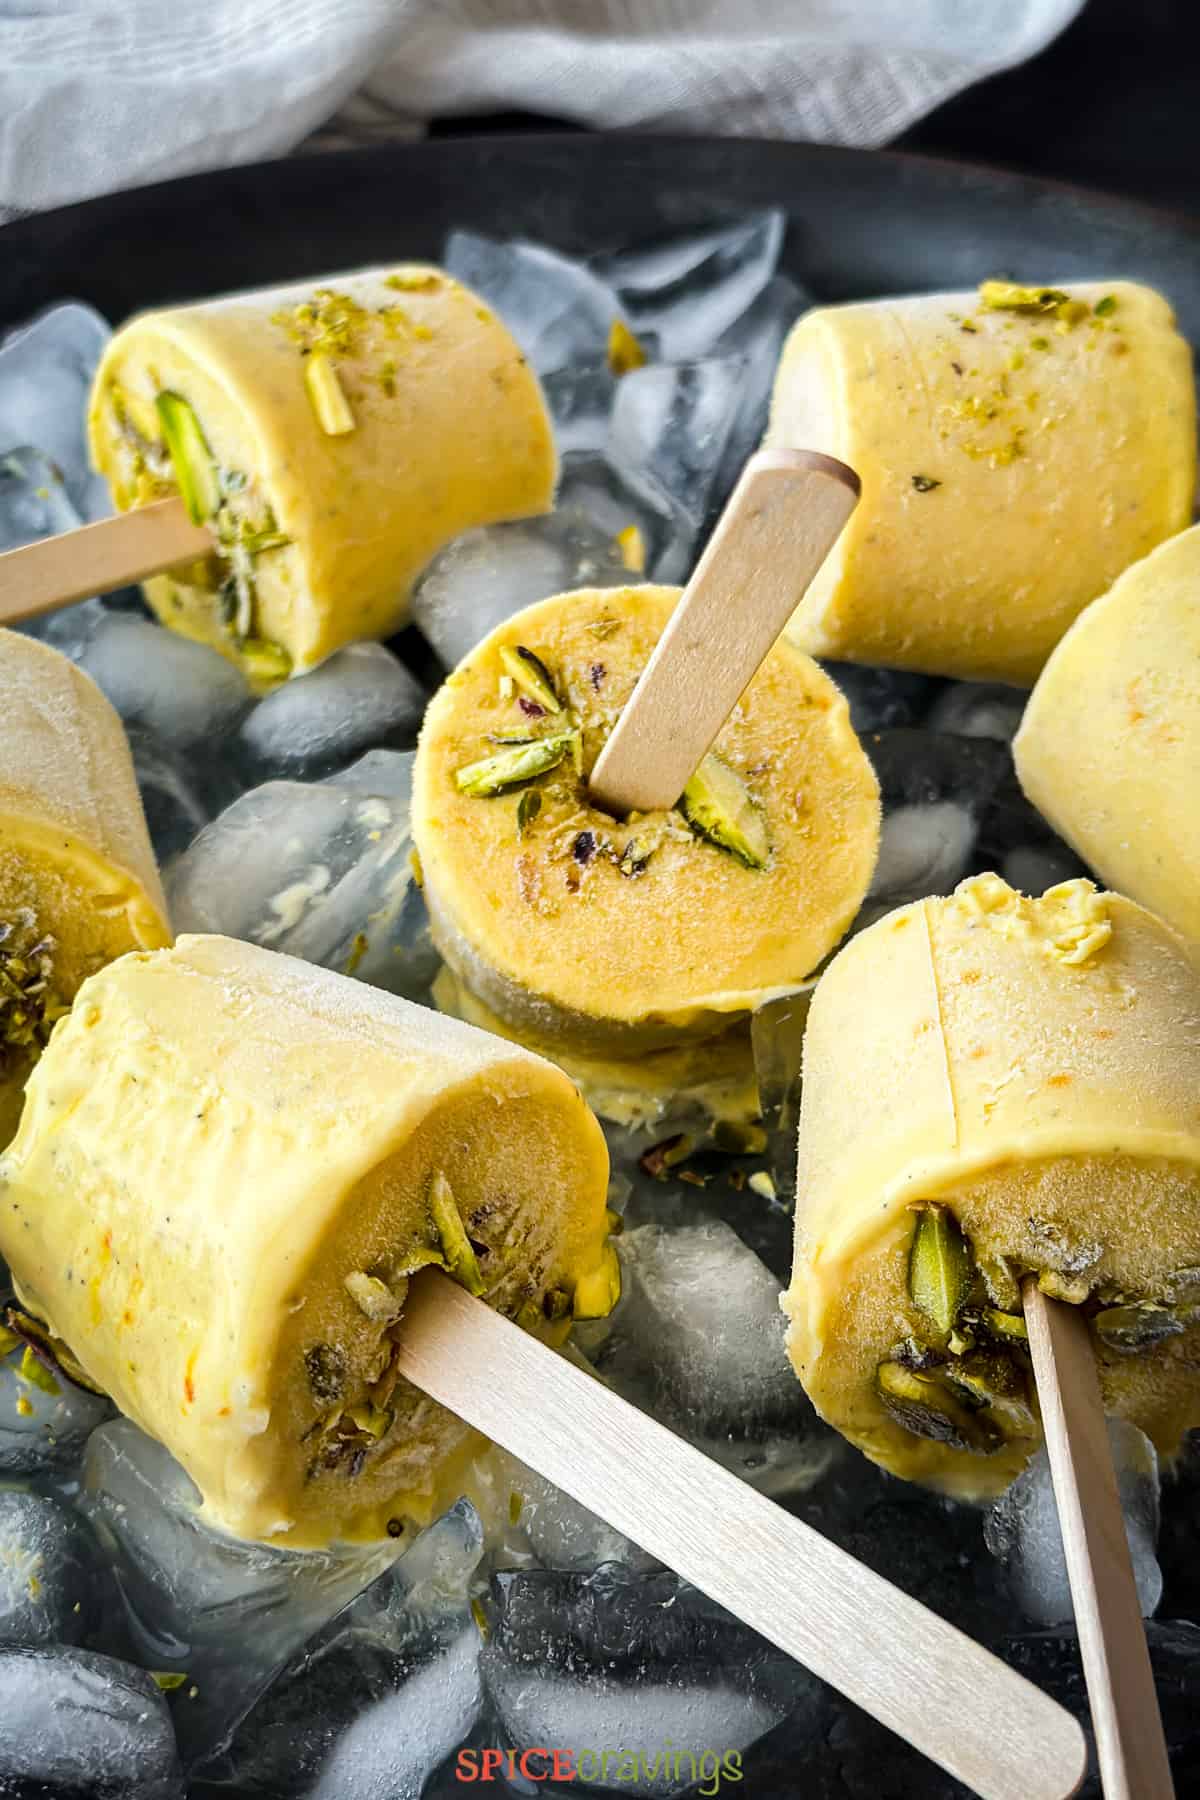 7 Mango ice cream sticks on a plate of ice cubes garnished with sliced pistachio